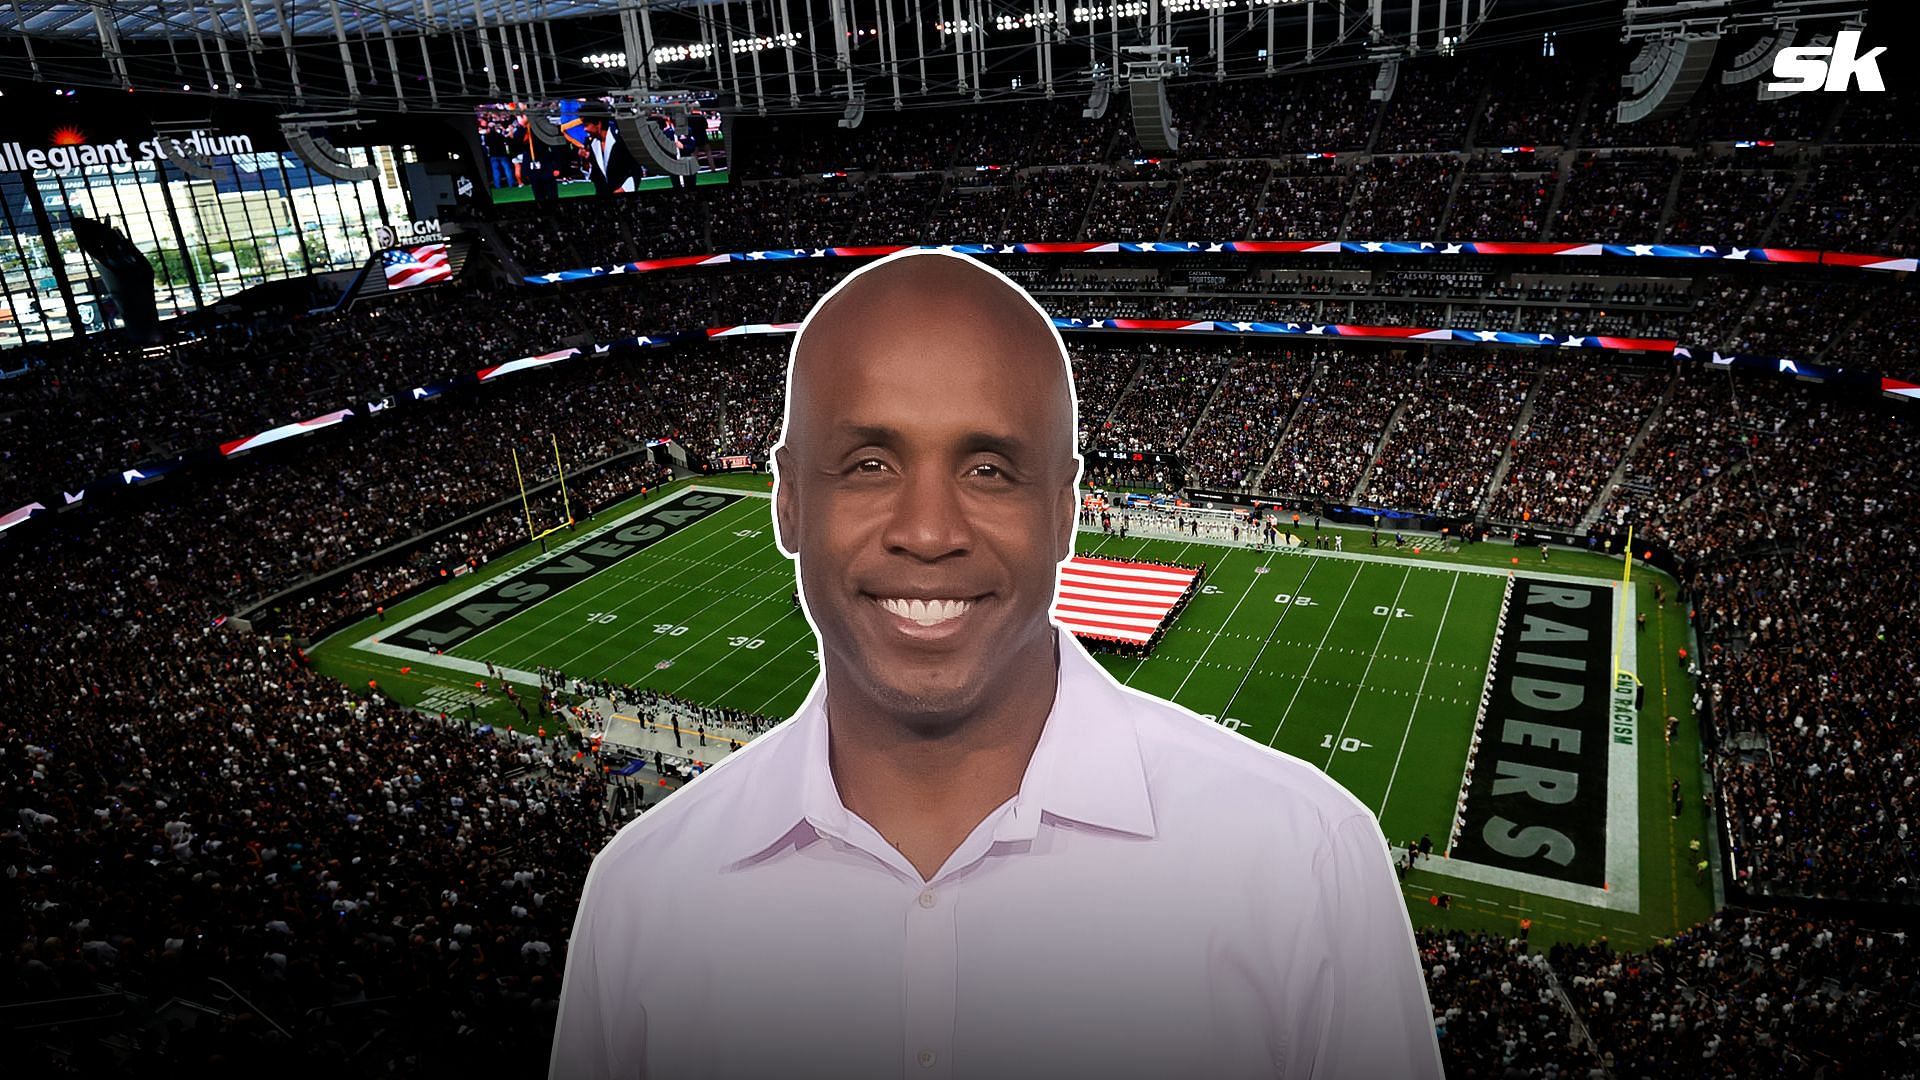 Barry Bonds has made it clear who he supports in the upcoming Super Bowl